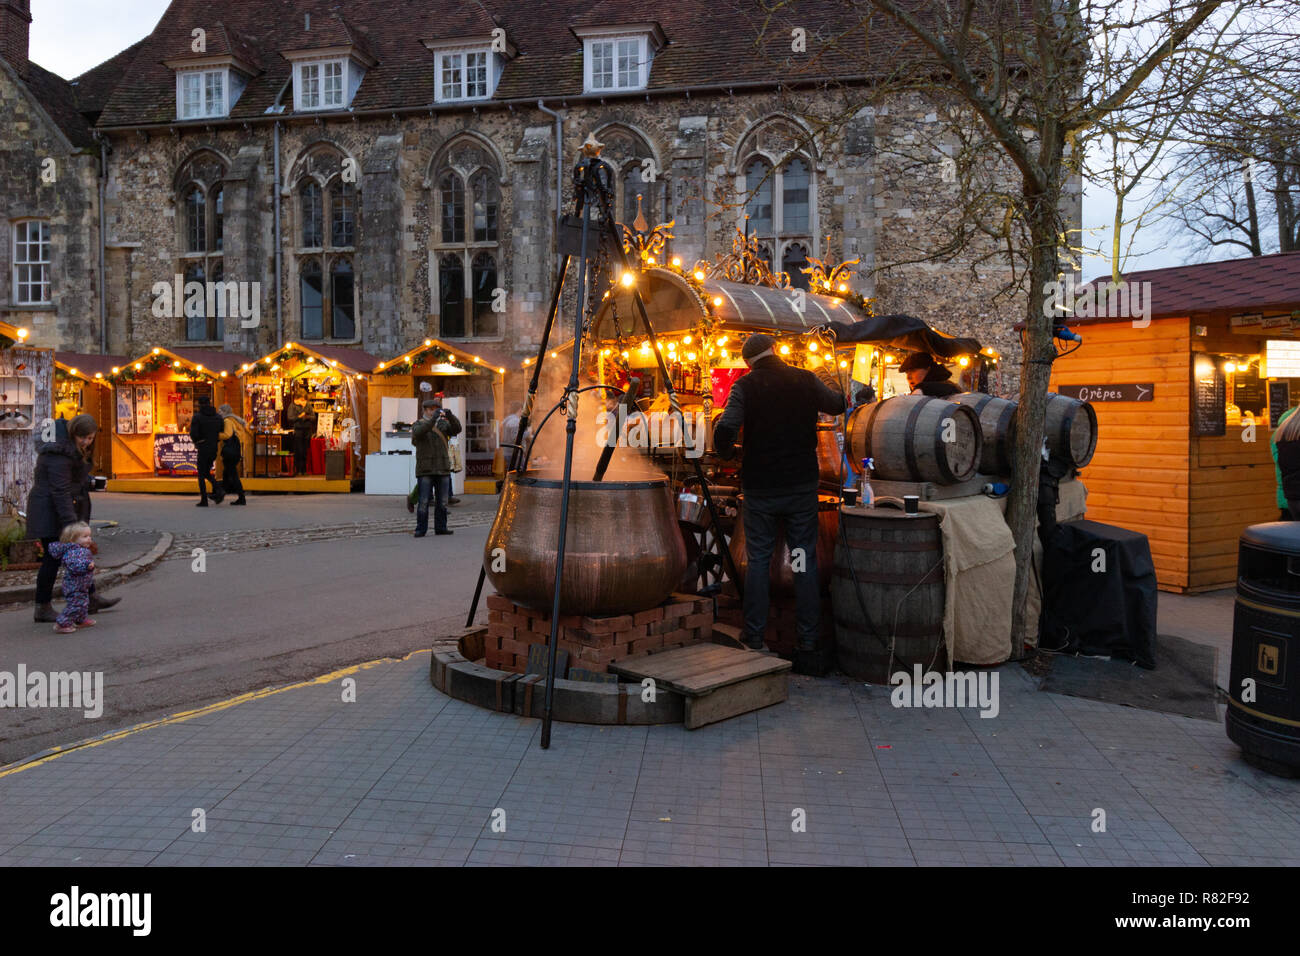 Winchester, Hampshire, England, December 12 2018. Christmas market stalls in the grounds of Winchester Cathedral with one selling gluhwein Stock Photo